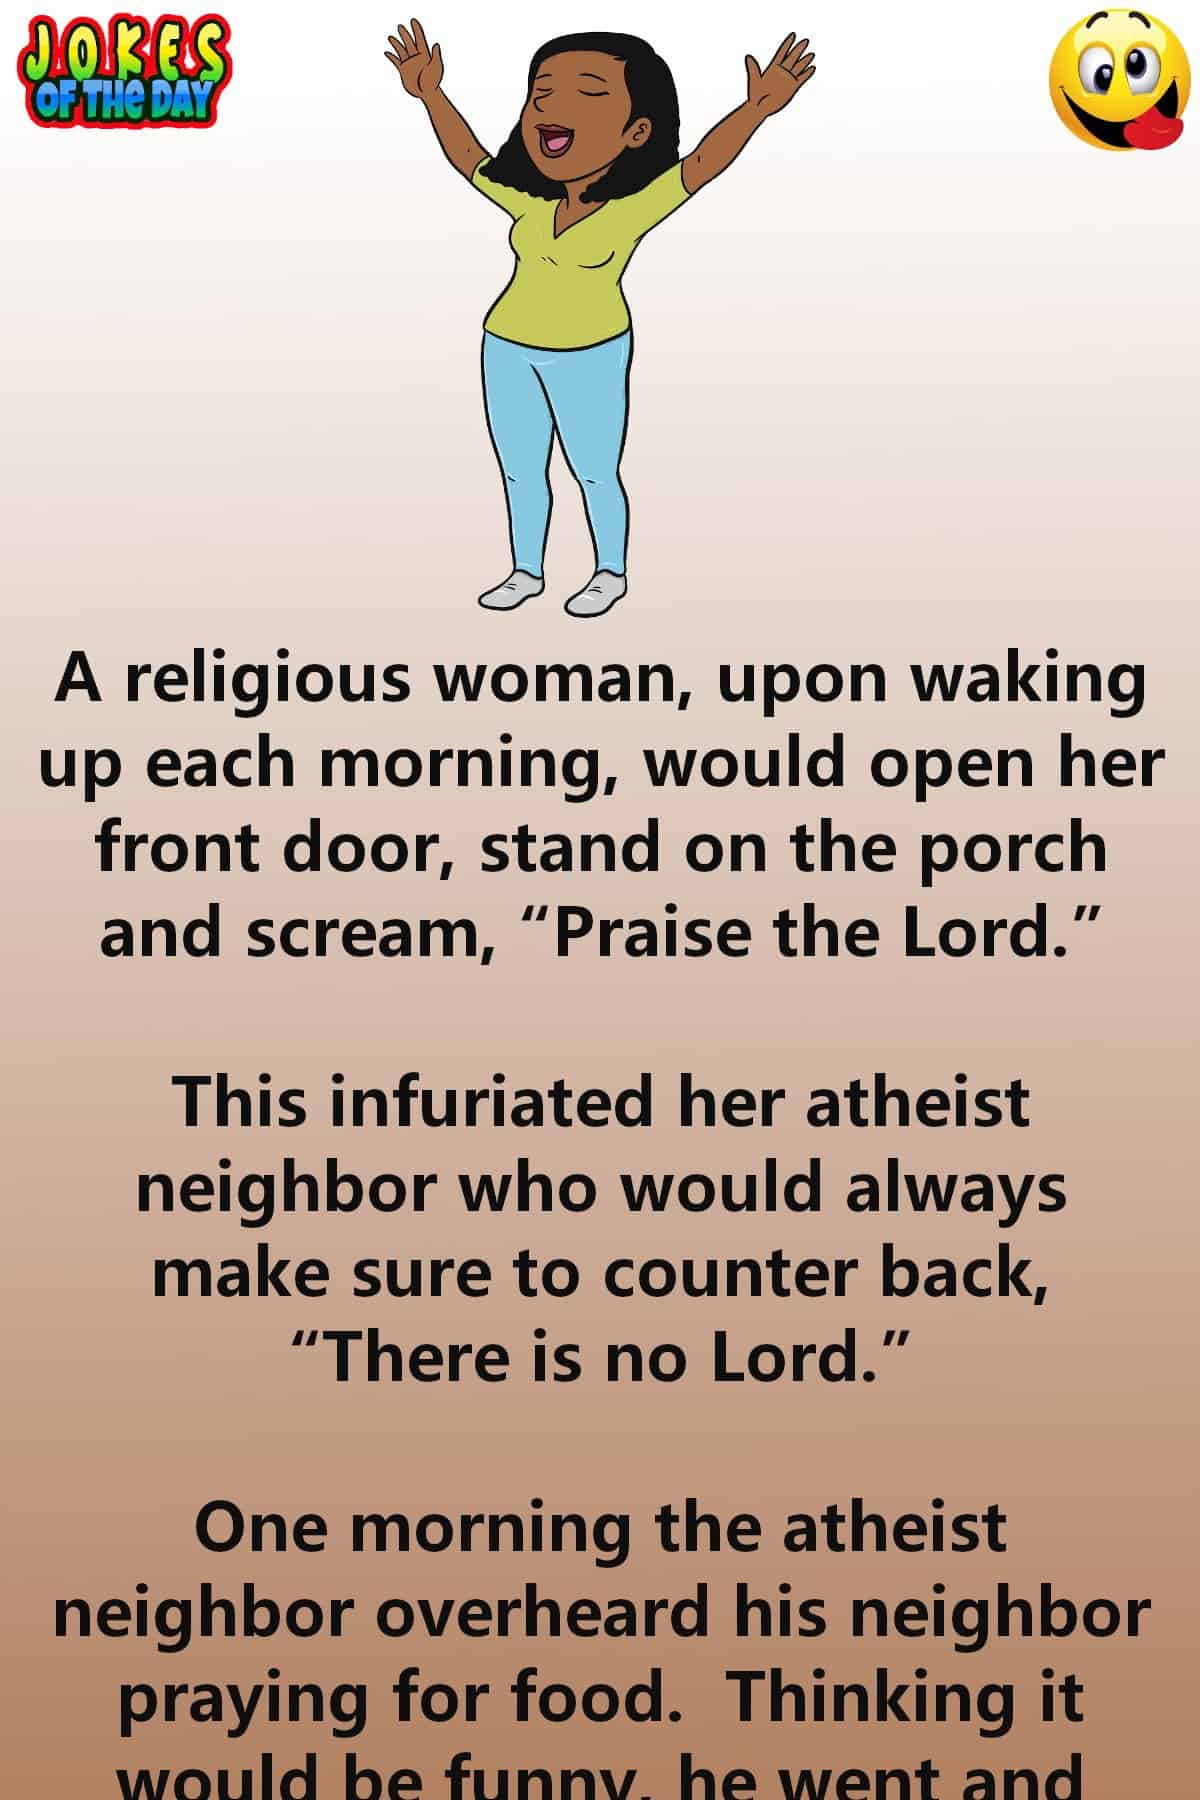 Funny - The infuriated her atheist neighbor